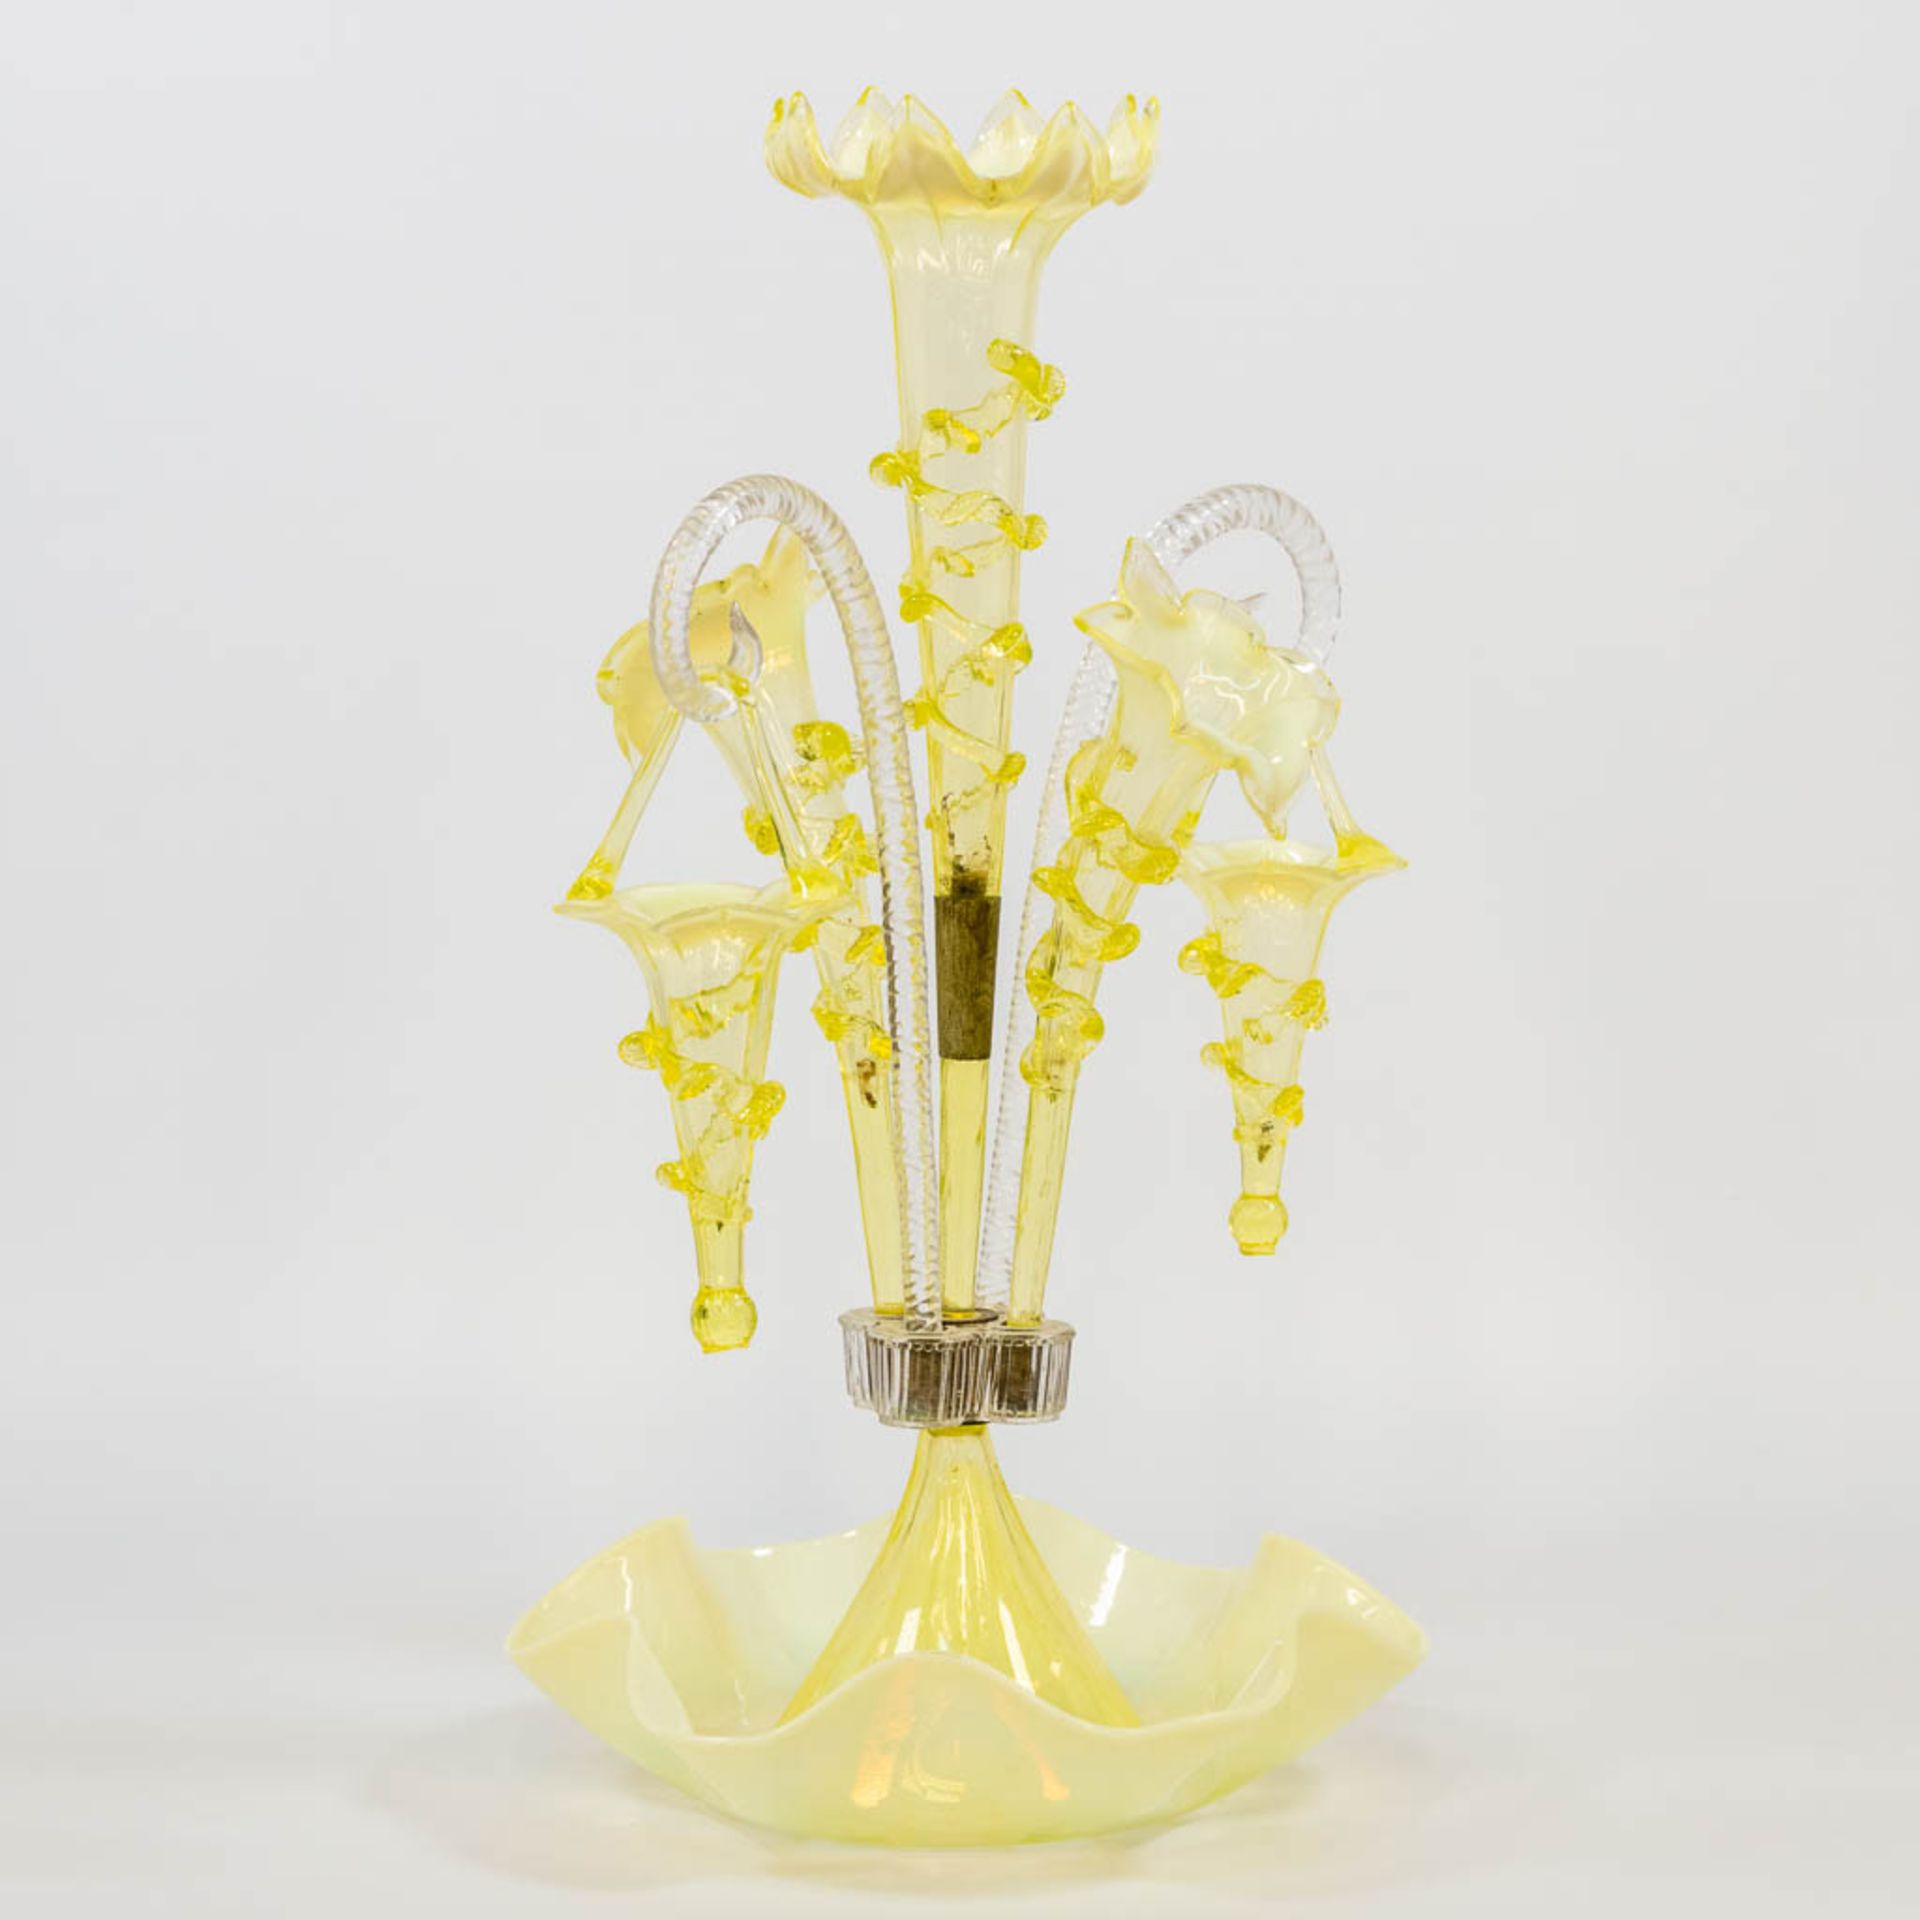 A yellow and clear glass table centrepiece pic-fleur, made in Murano, Italy. (25 x 28 x 45 cm) - Image 13 of 15